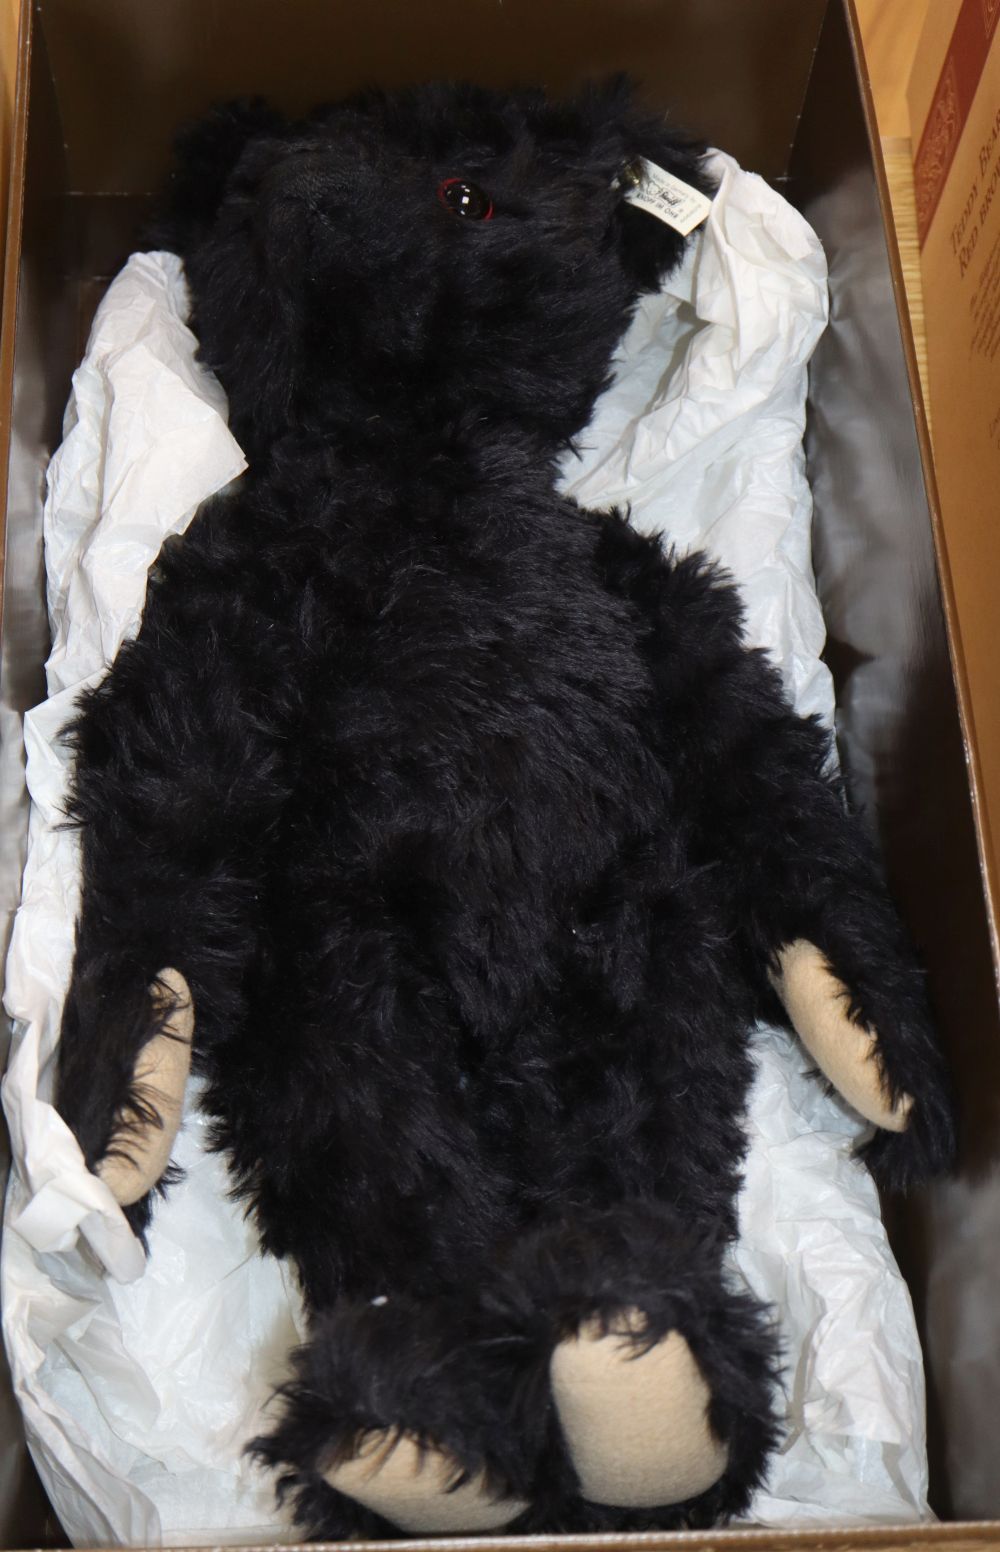 A Steiff British Collectors black bear, boxed with certificate